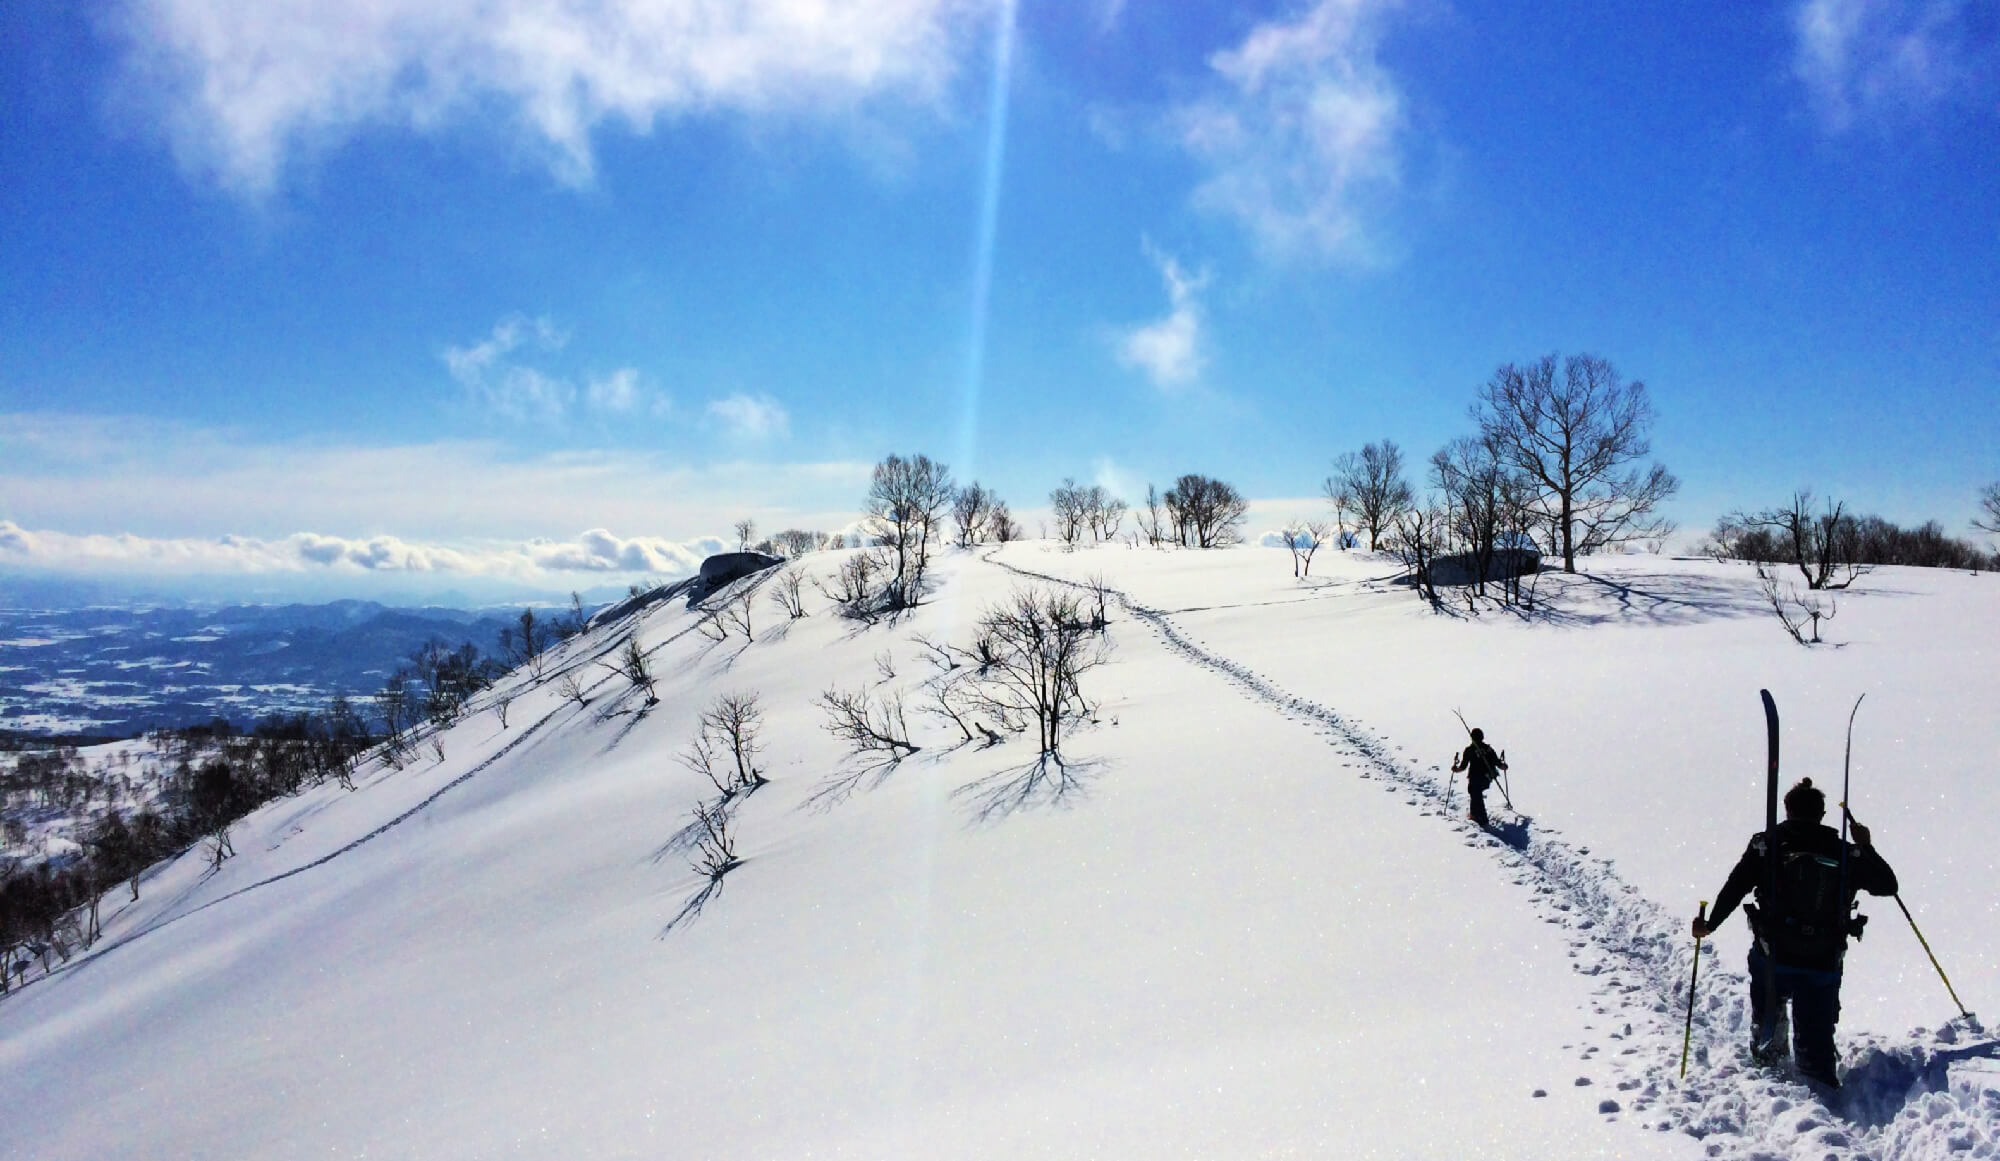 Niseko, Japan is one of the best places to ski in the world